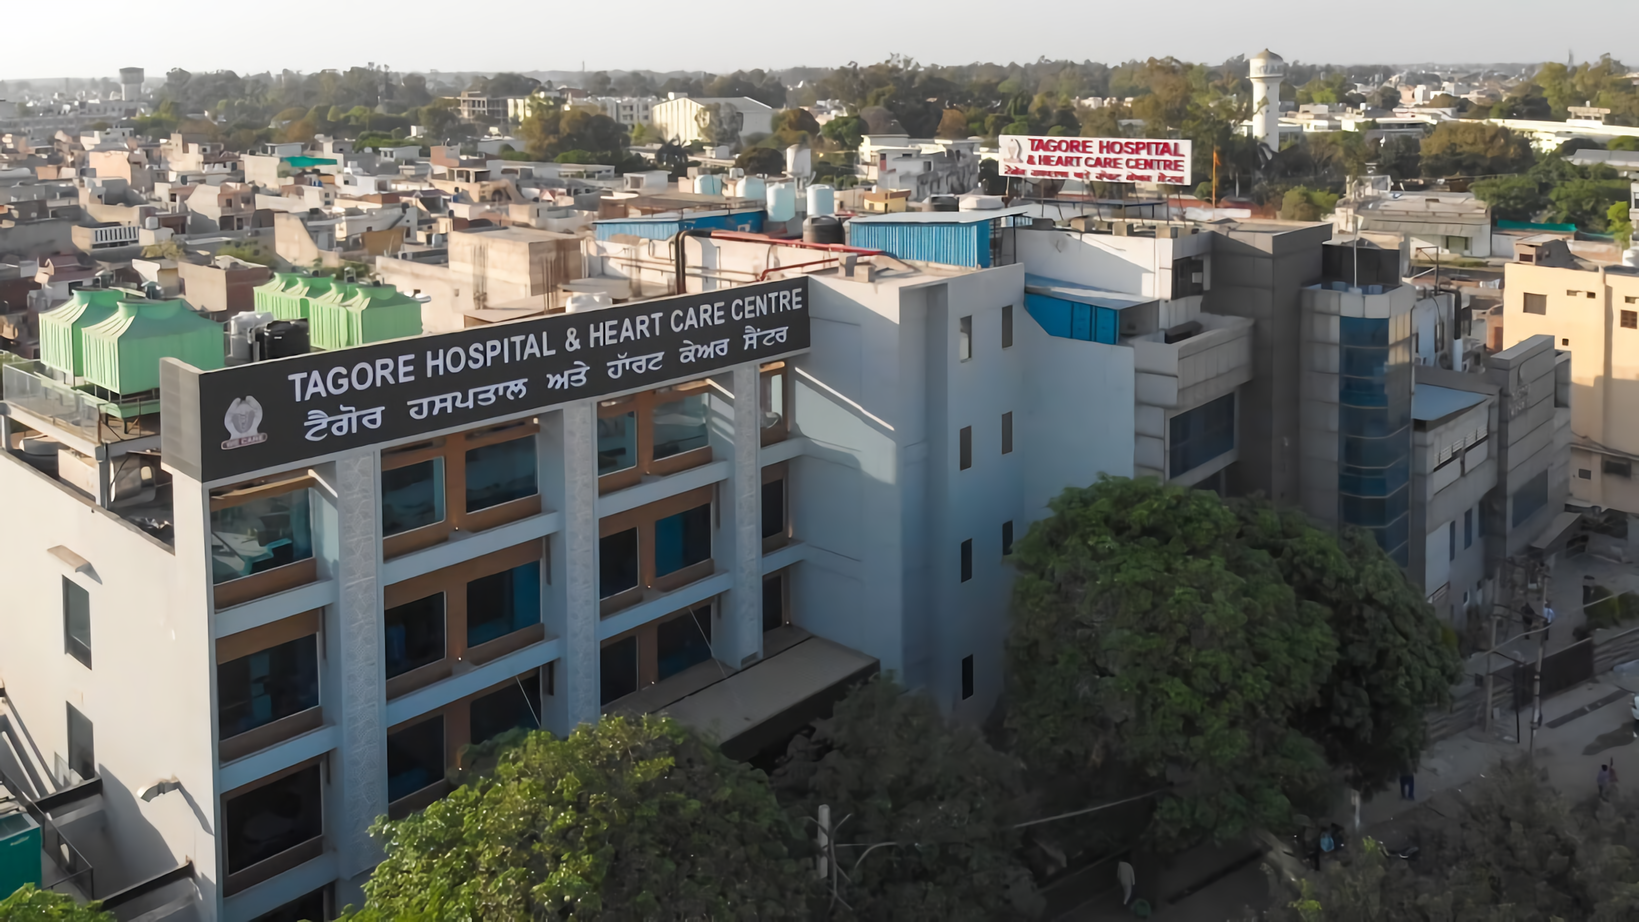 Tagore Hospital And Heart Care Centre